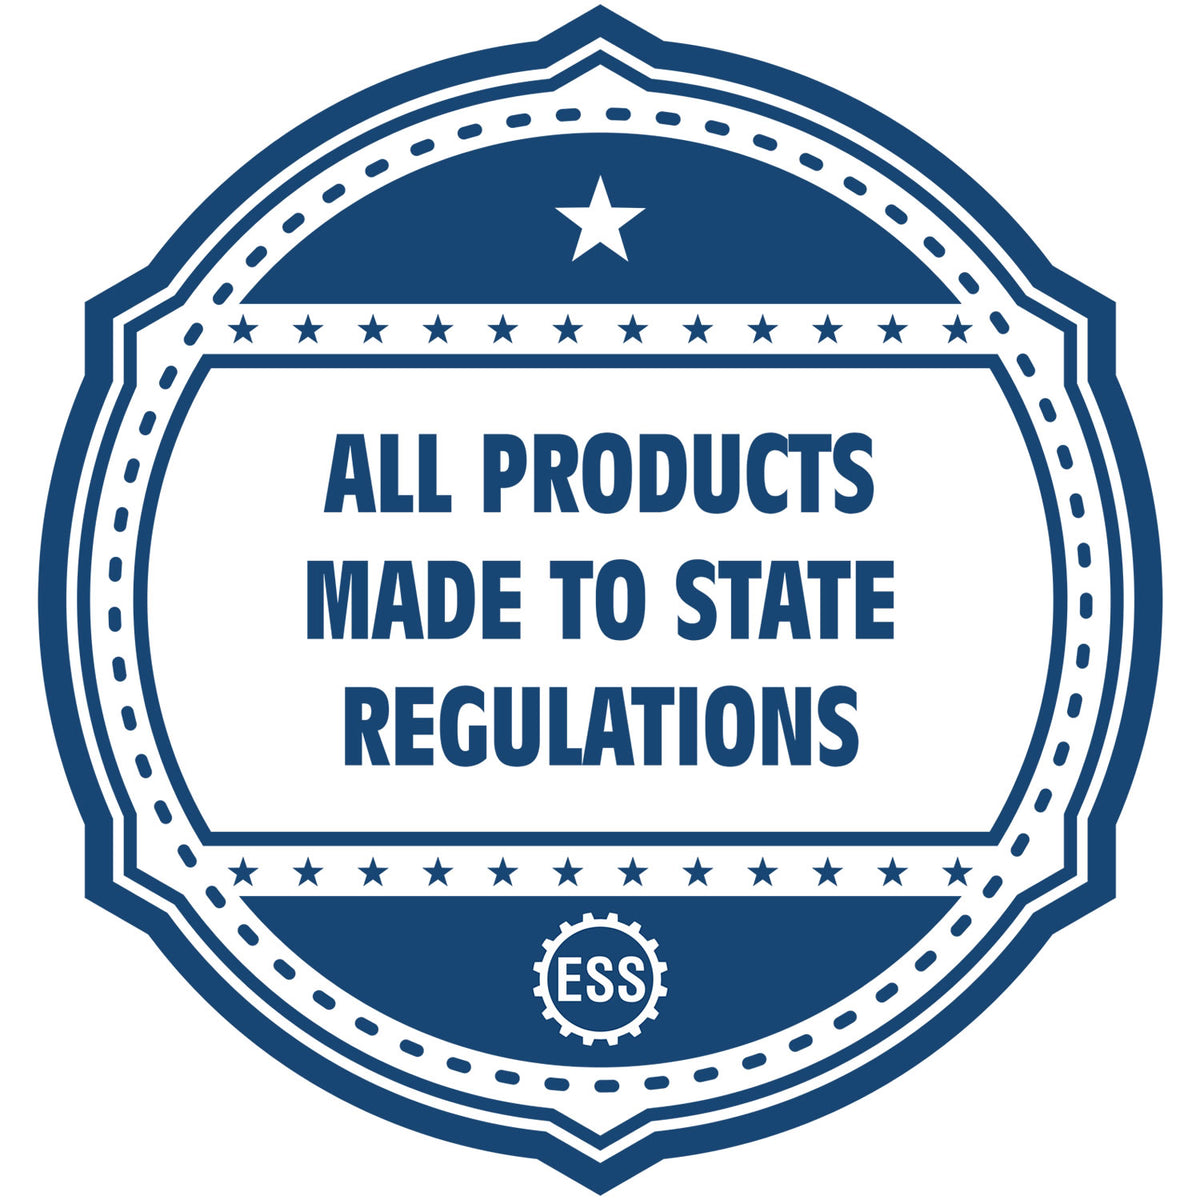 A blue icon or badge for the Hybrid New Jersey Engineer Seal showing that this product is made in compliance with state regulations.